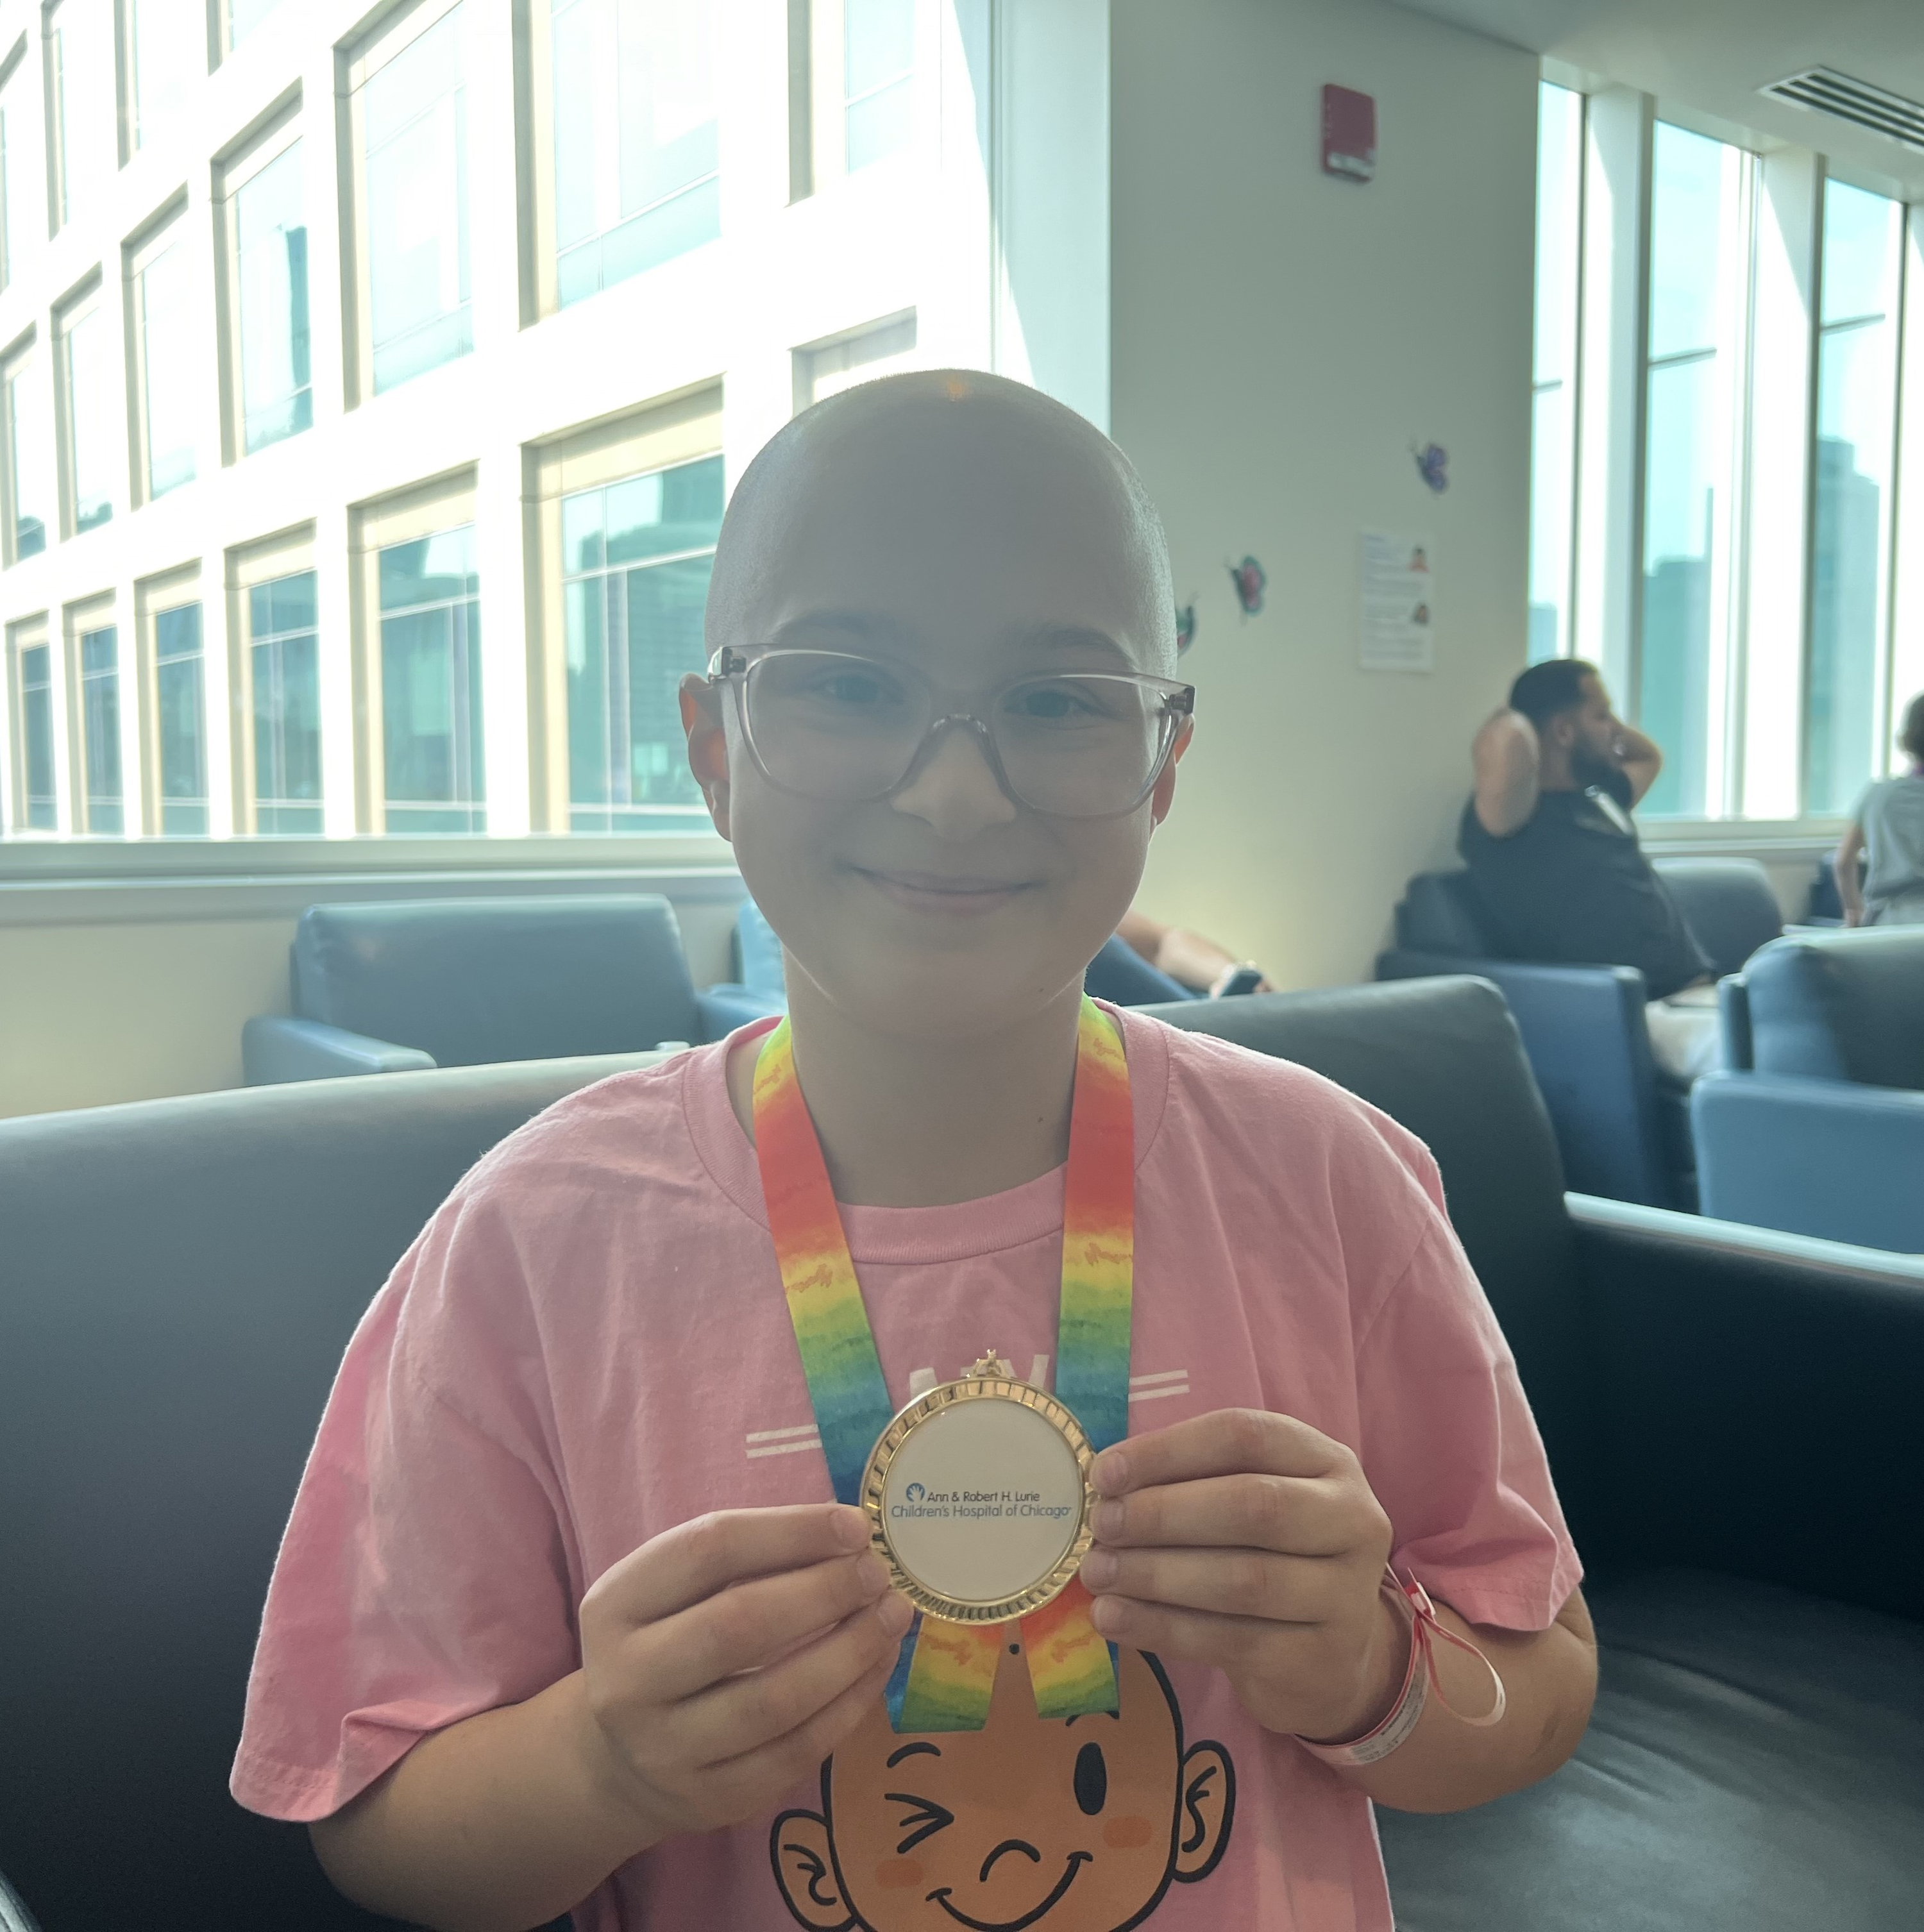 As Olympics continue, patients at Lurie receive medals of their own